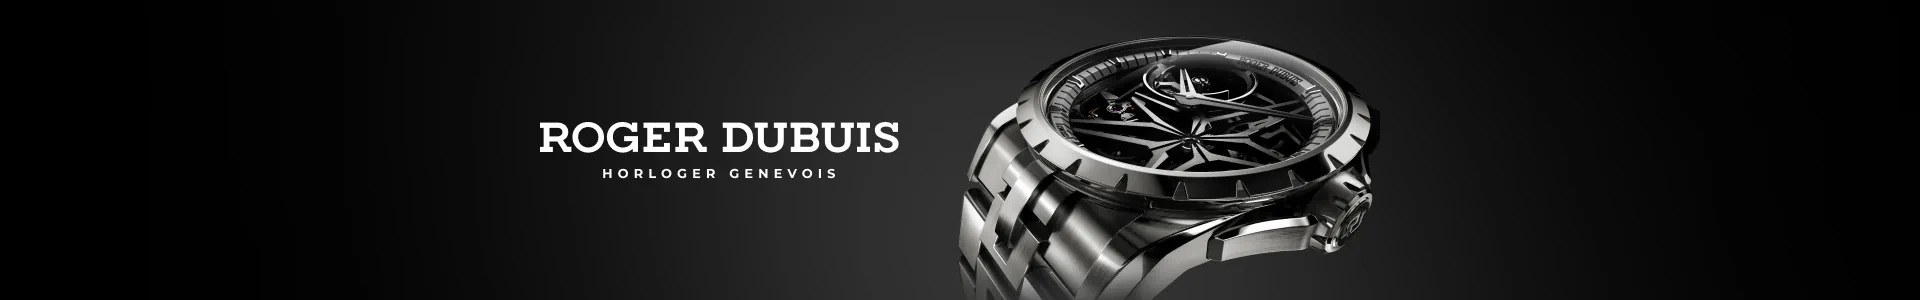 Roger DuBuis Watches